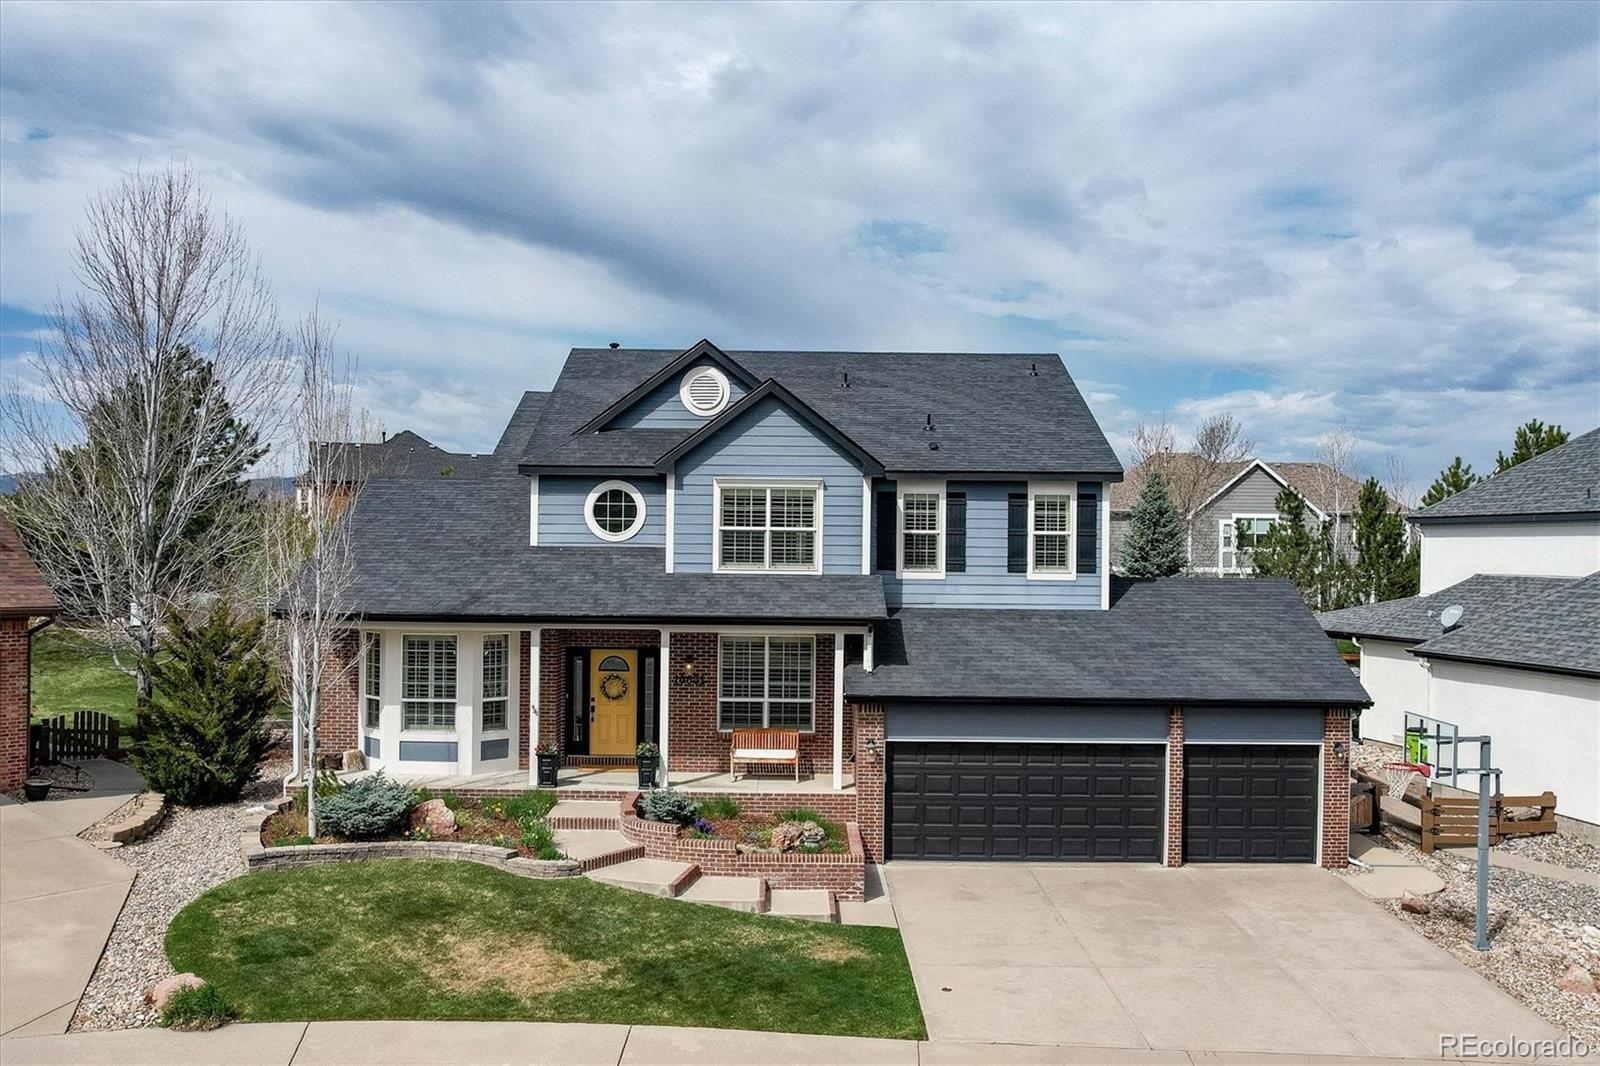 10651  weathersfield court, Highlands Ranch sold home. Closed on 2024-05-21 for $1,395,000.